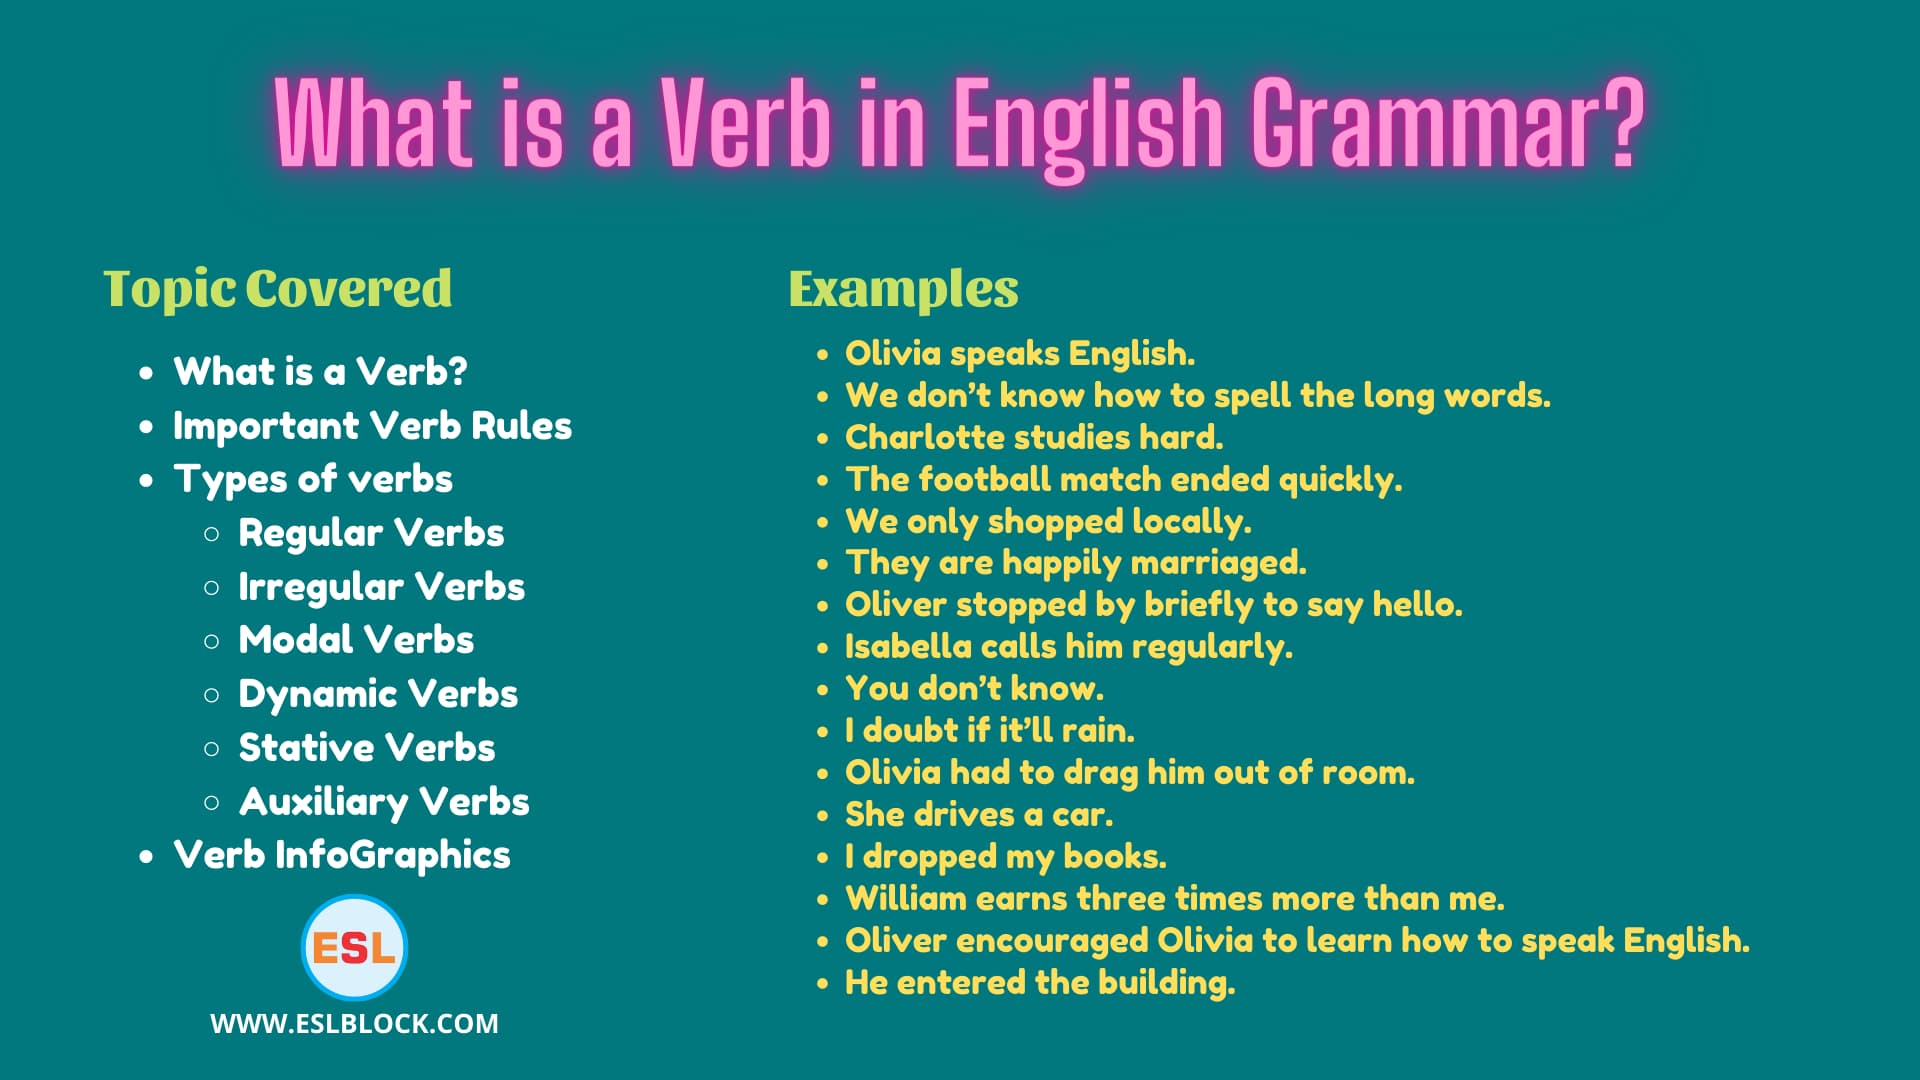 A Super Simple Guide to Verb, Auxiliary Verbs, Causative Verbs, Different Forms of Main Verbs, Dynamic Verbs, English Grammar, How to Use Verbs, Important Verb Rules, Intransitive Verbs, Irregular Verb Definition, Irregular Verb Examples, Irregular Verbs, Linking Verbs, List of Verbs, Mastering English Verbs, Modal Verbs, Parts of Speech, Parts of Speech in English Grammar, Stative Verbs, Subject Verb Agreement Rules, The Importance of Verbs, Transitive Verbs, Types of Verbs, Verb Definition, Verb Examples, Verb Rules, Verbs Used in Sentences, Verbs with Examples, What is an Verb